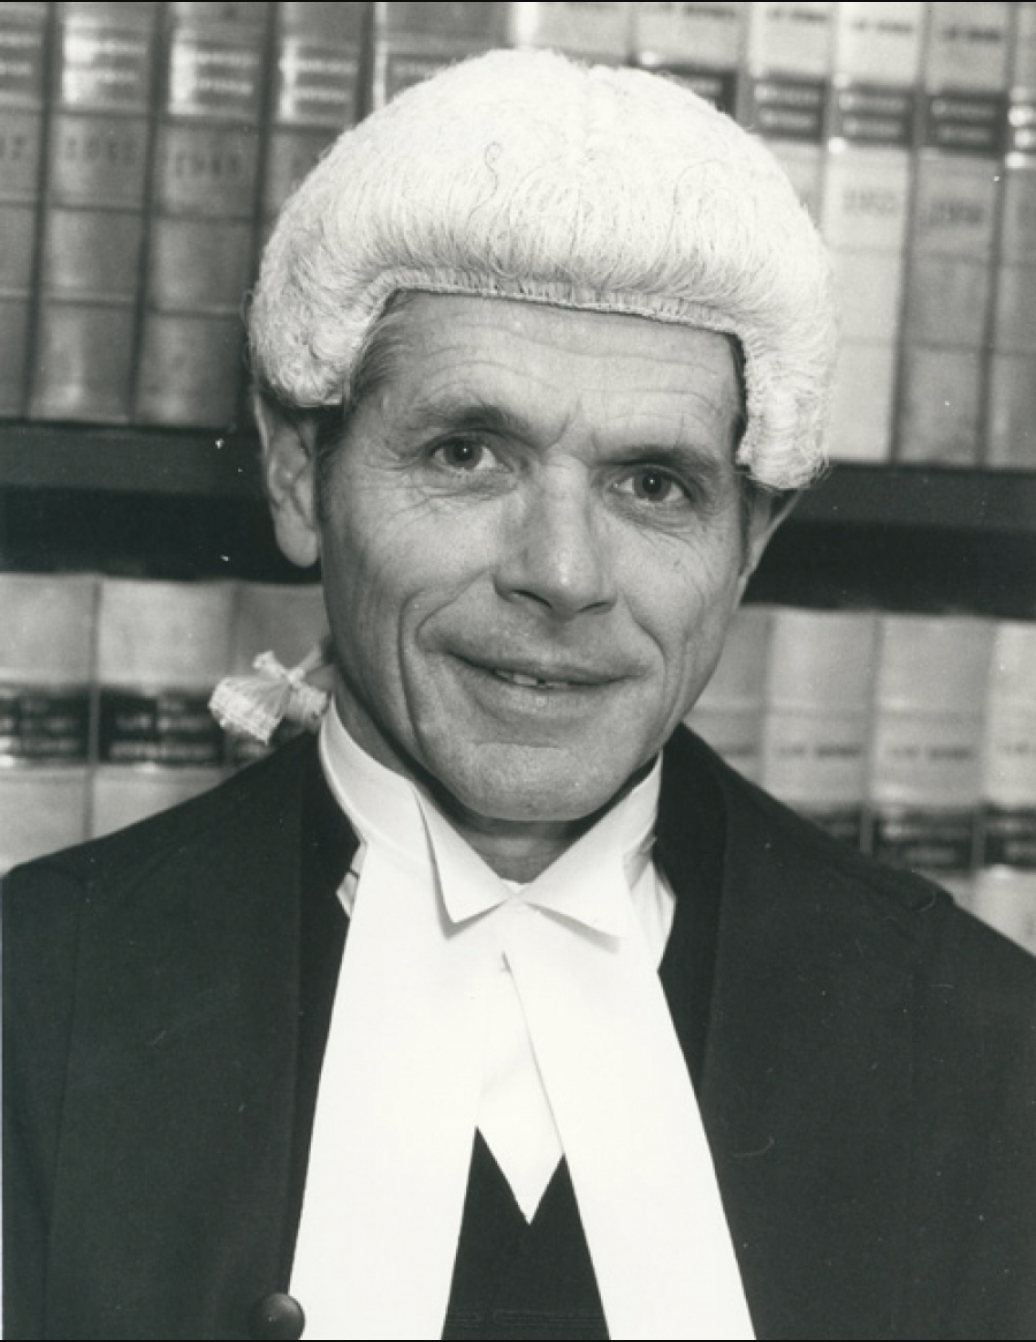 Black and white headshot of a smiling man wearing a High court judge wig and robes against a background of textbooks